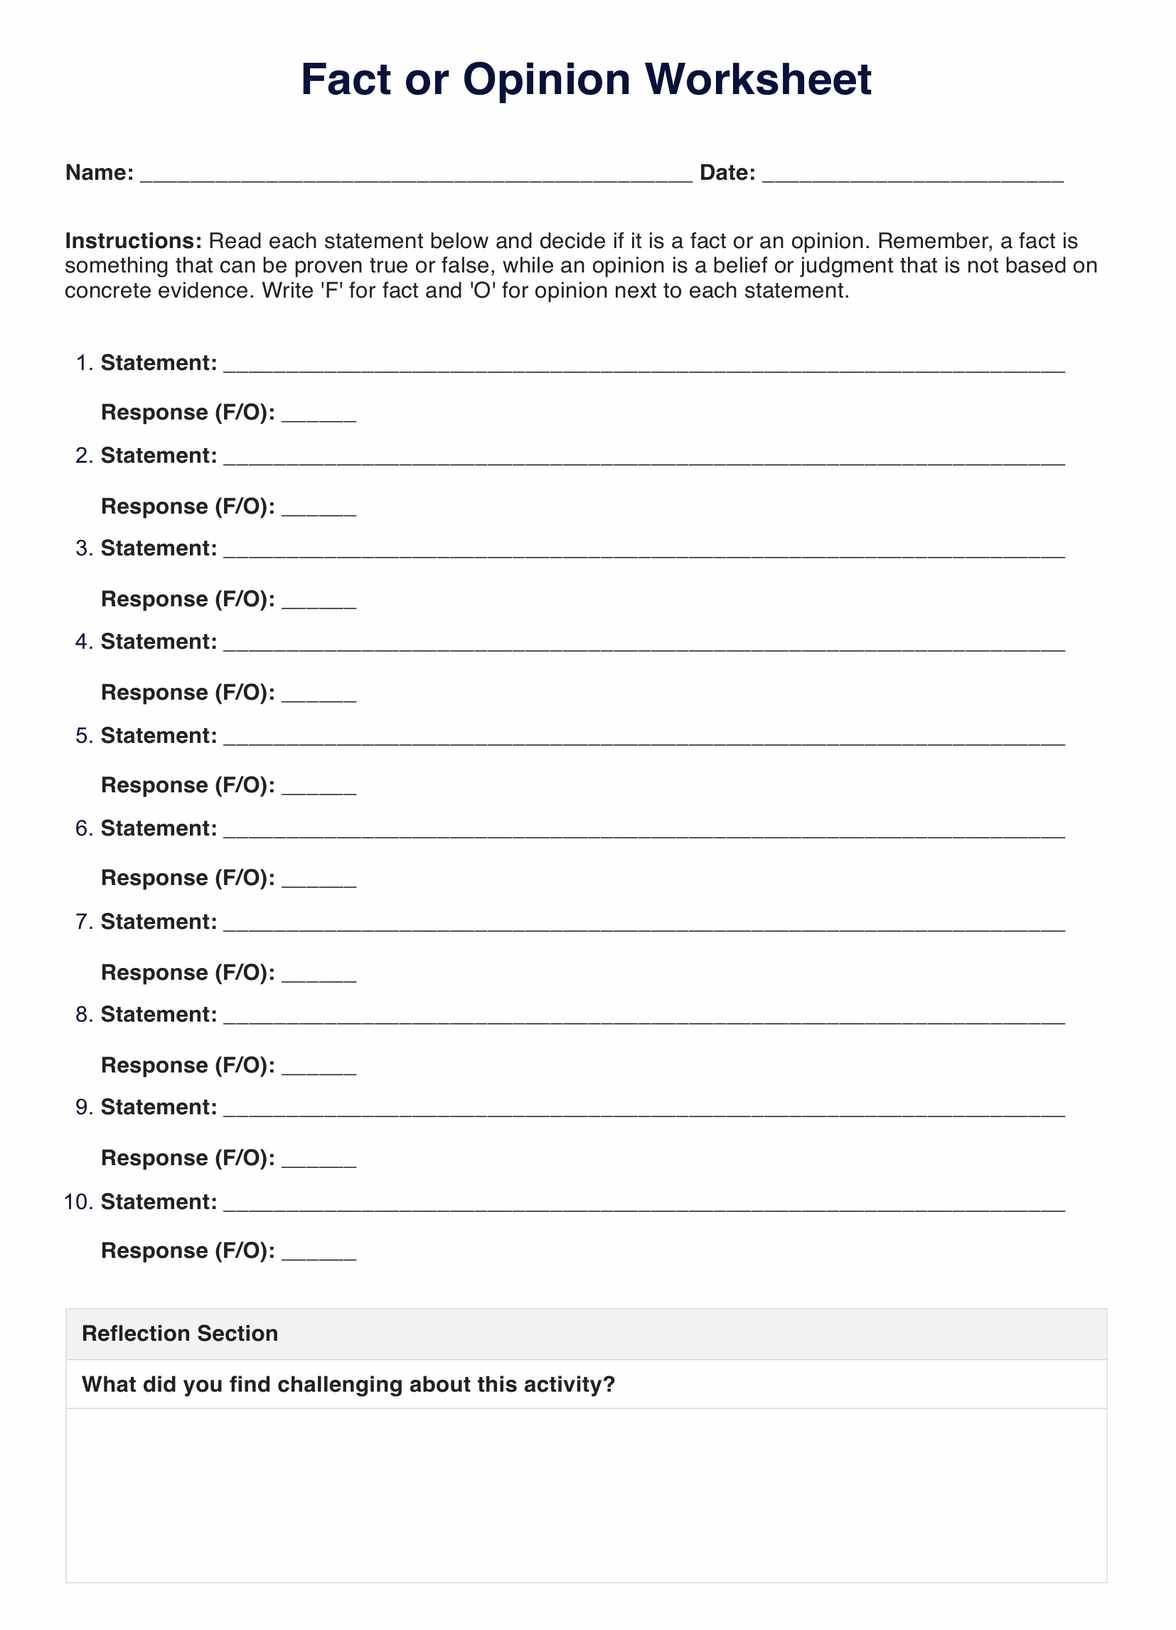 Fact or Opinion Worksheet PDF Example